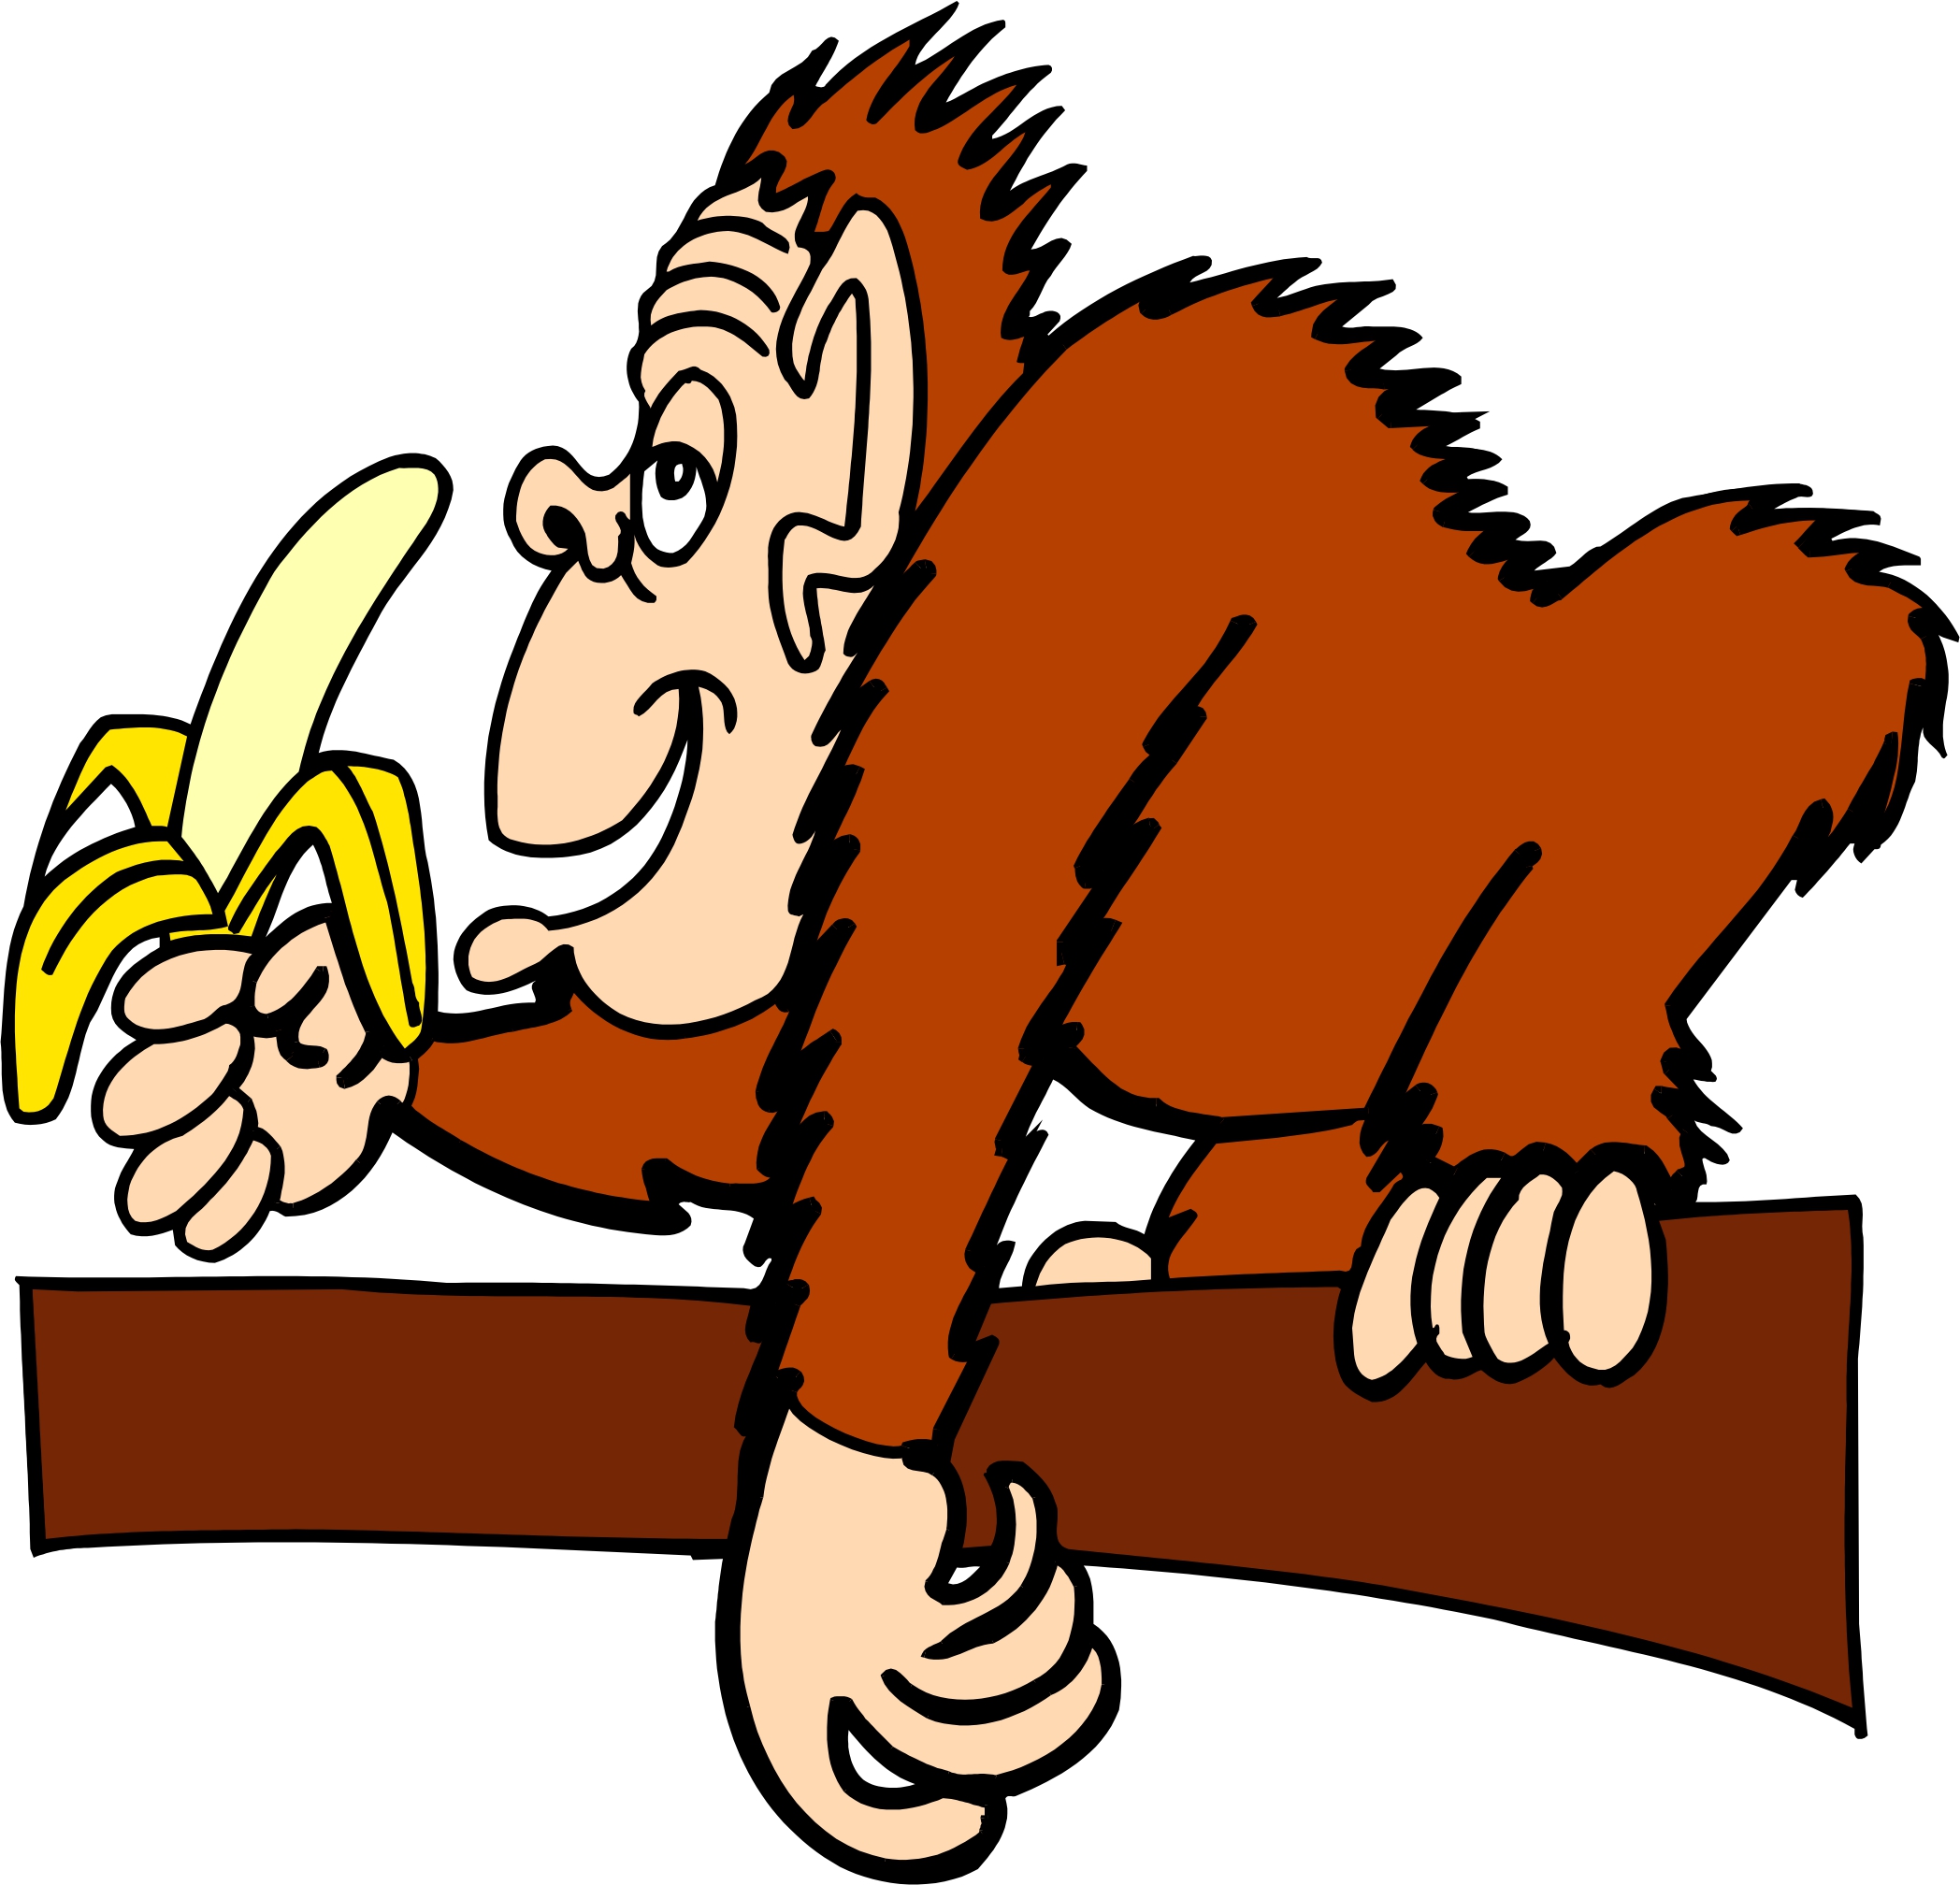 How To Draw A Monkey Eating A Banana ClipArt Best ClipArt Best